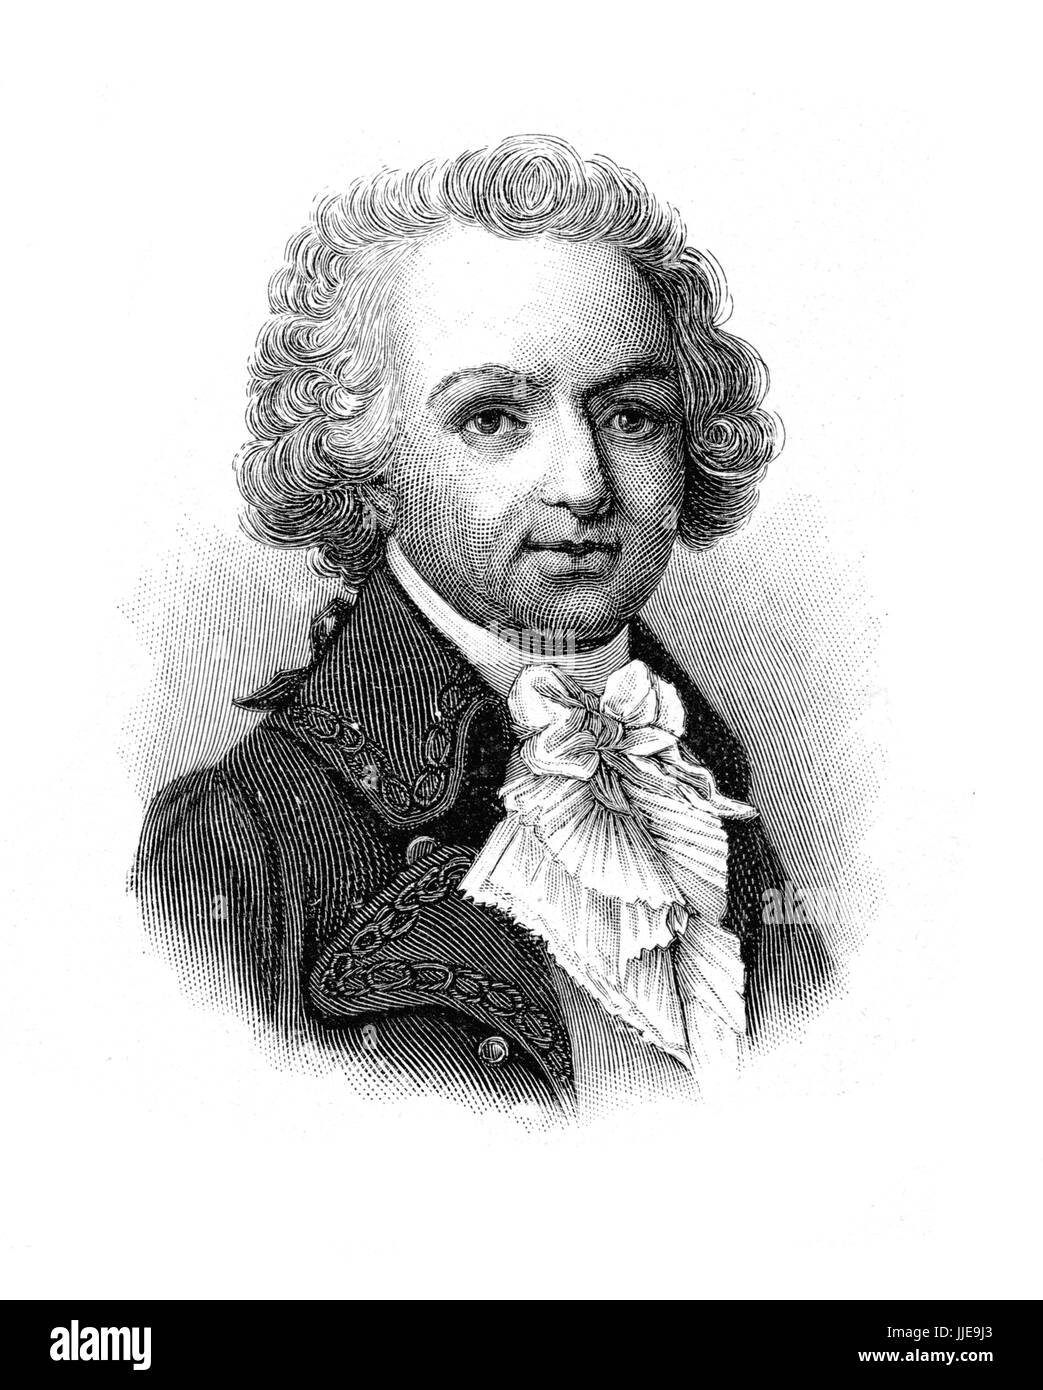 Portrait of Louis-Antoine, Comte de Bougainville, French admiral and explorer of many scientific expeditions and a circumnavigation of the globe in XVIII century Stock Photo